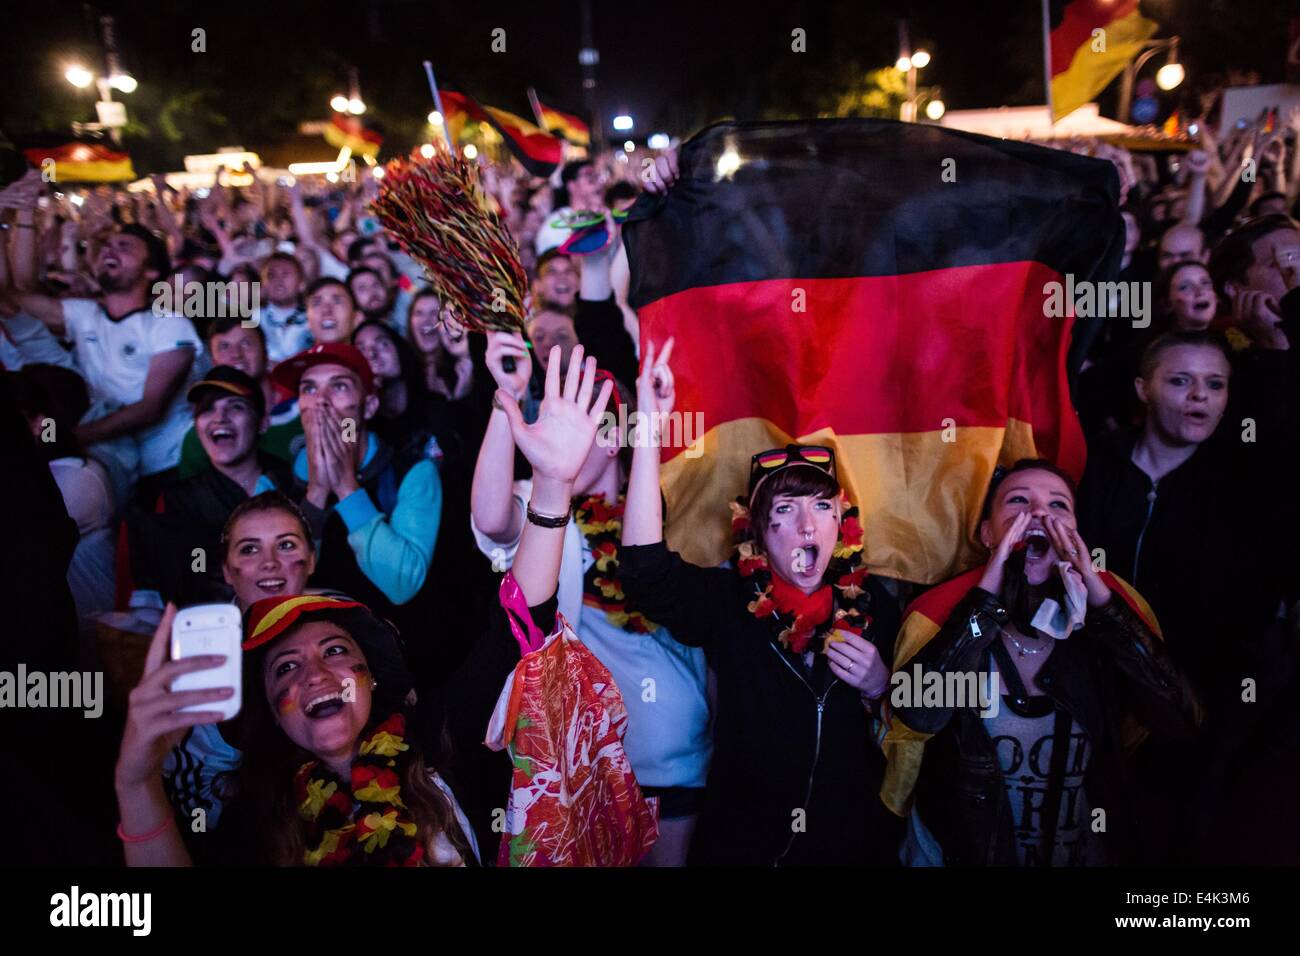 Berlin, Germany. 13th July, 2014. Spectators cheer during the FIFA World Cup 2014 Final match between Germany and Argentina in the fan mile at the Brandenburg Gate in Berlin, Germany, 13 July 2014. Germany won 1-0 and became World Champion. Photo: Maja Hitij/dpa/Alamy Live News Stock Photo